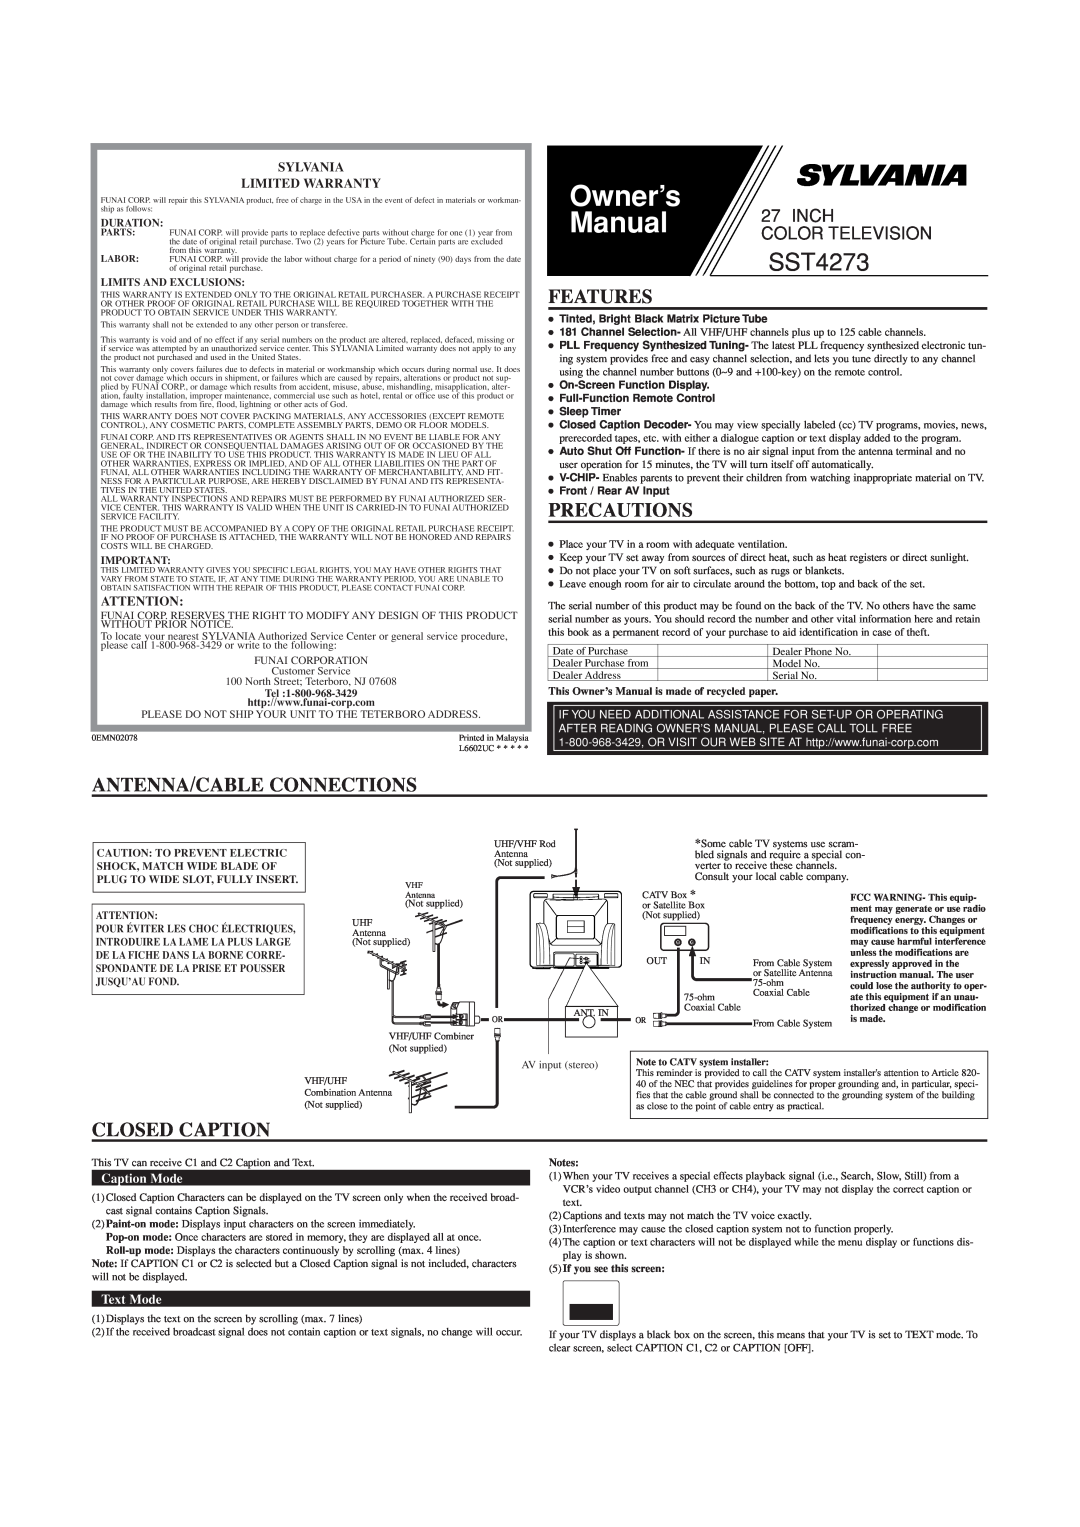 Sylvania SST4273 owner manual Features, Precautions, Antenna/Cable Connections, Closed Caption, Sylvania Limited Warranty 